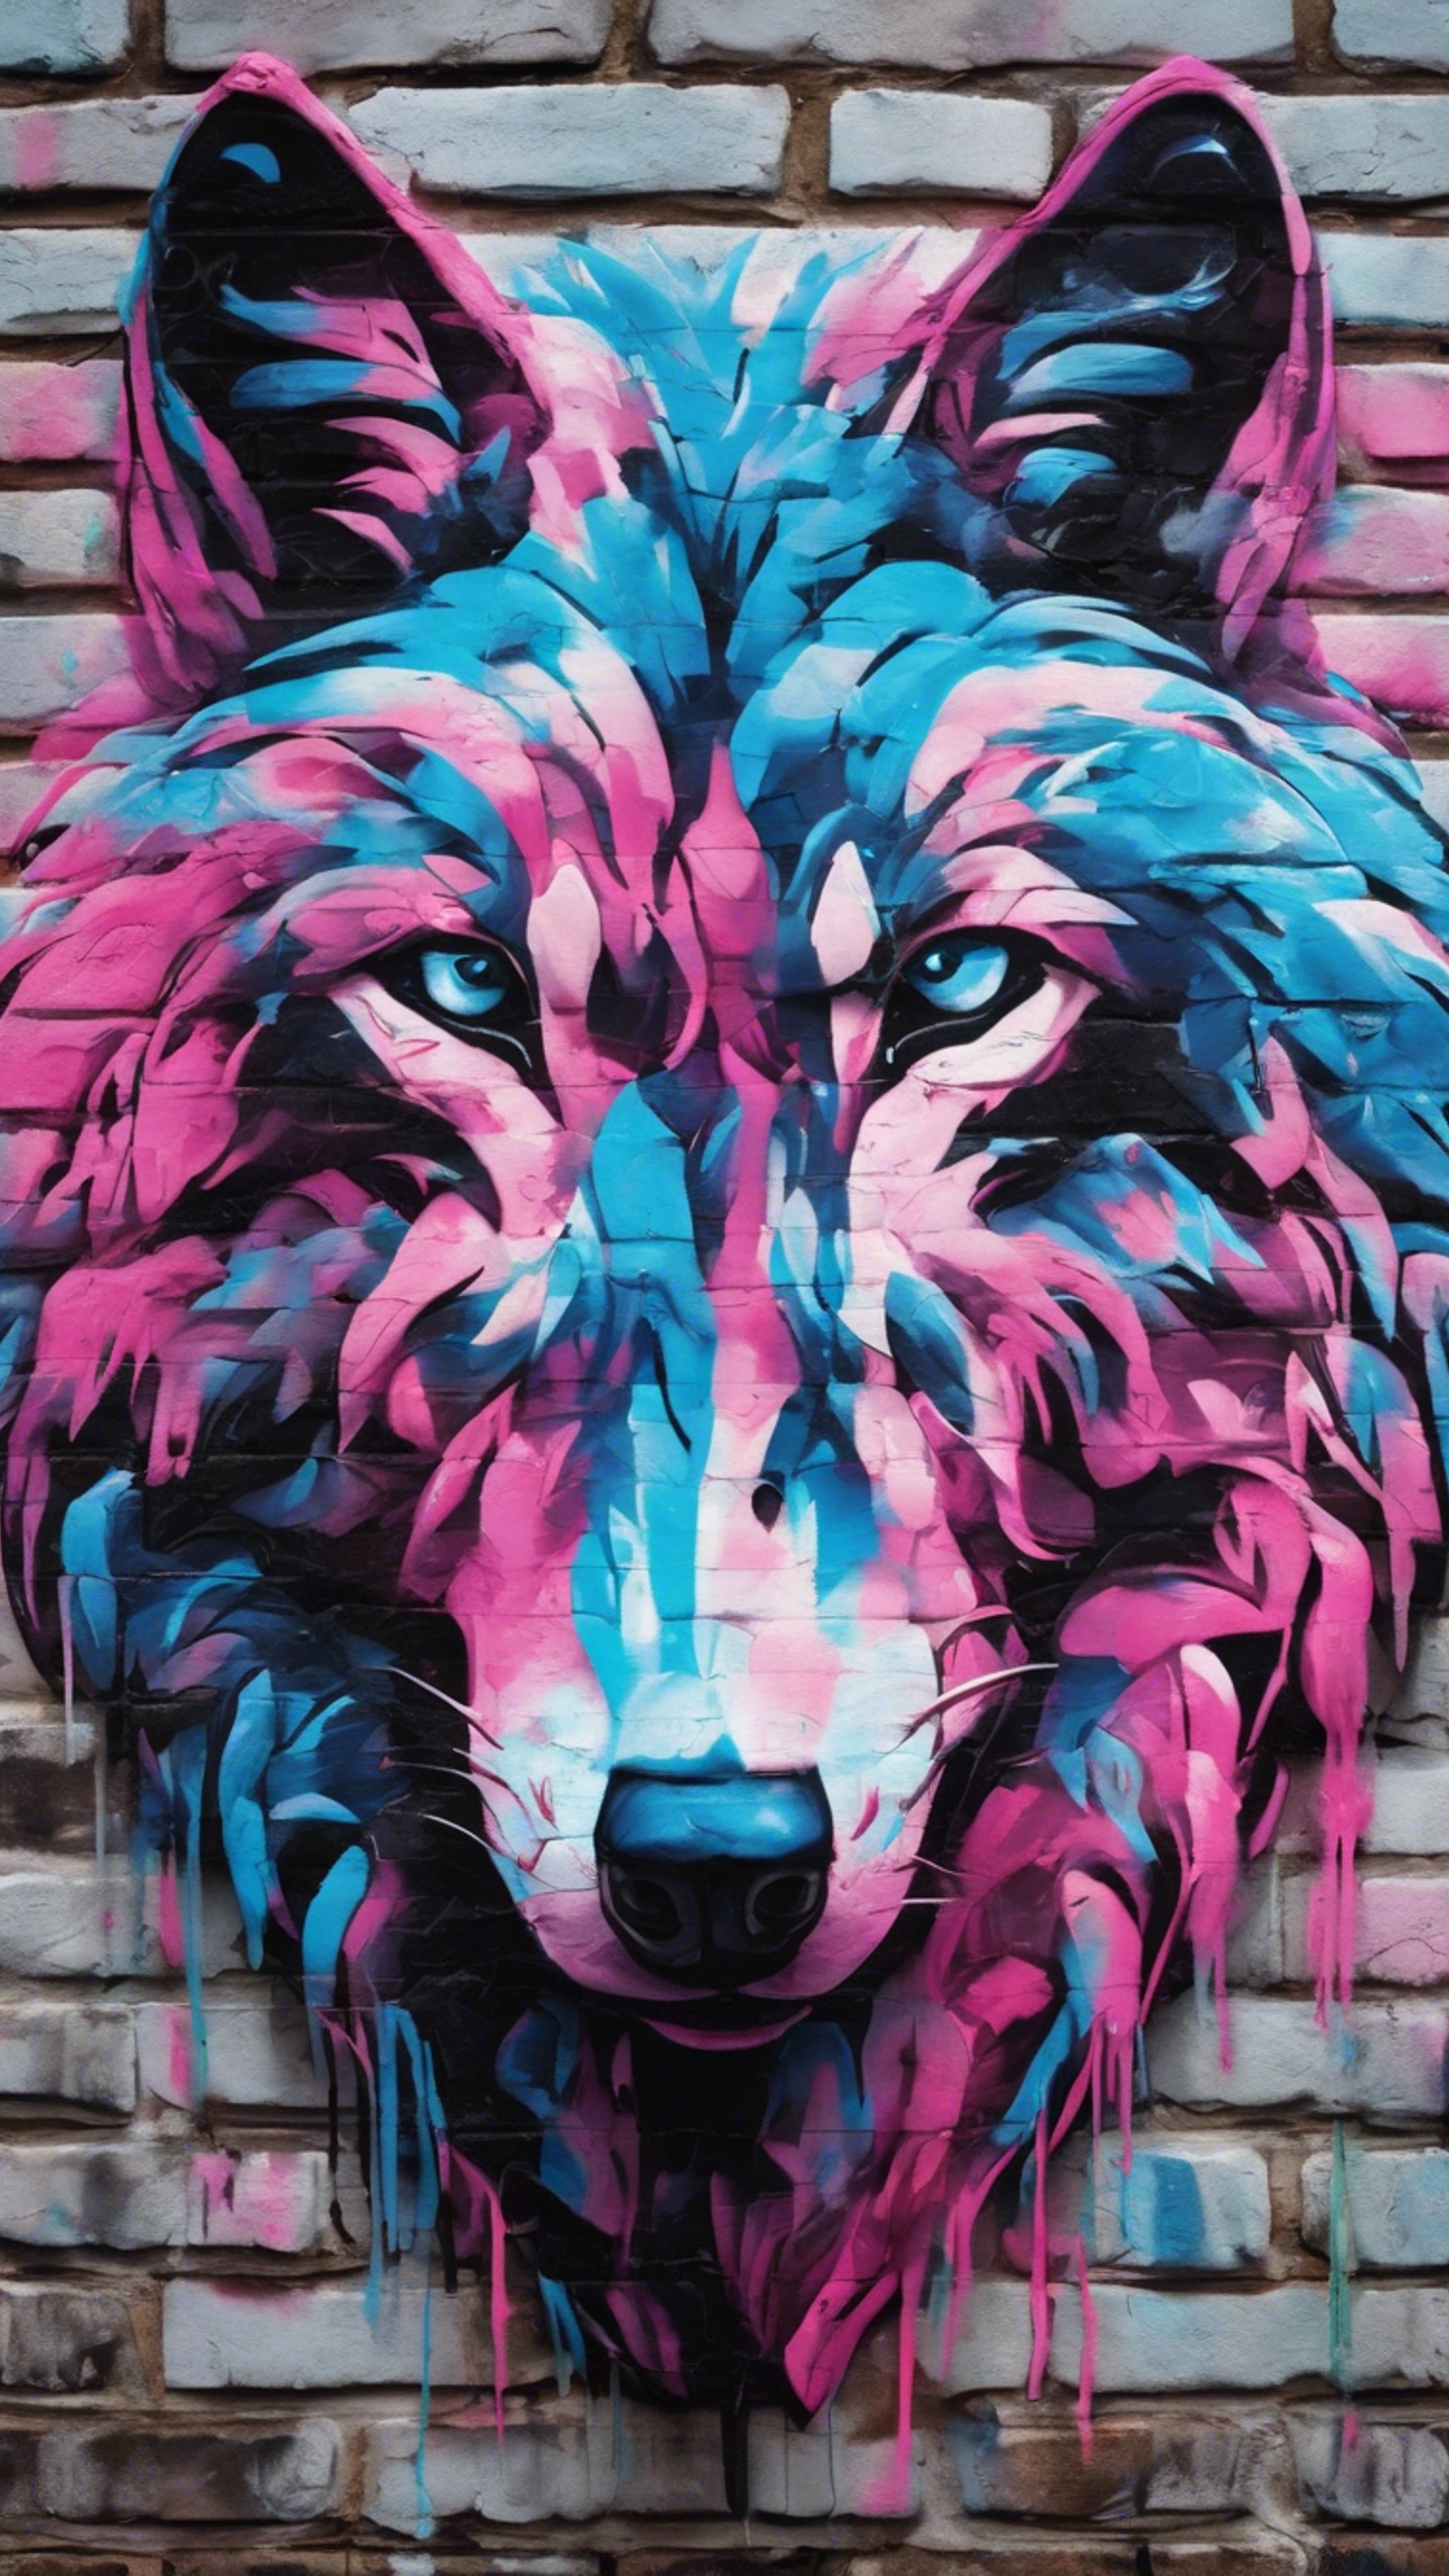 Graffiti of a vibrant, cosmic, cool wolf with neon blue and pink colors, painted across an urban brick wall. Wallpaper[a6ebfaca7d2e4cfbb51c]